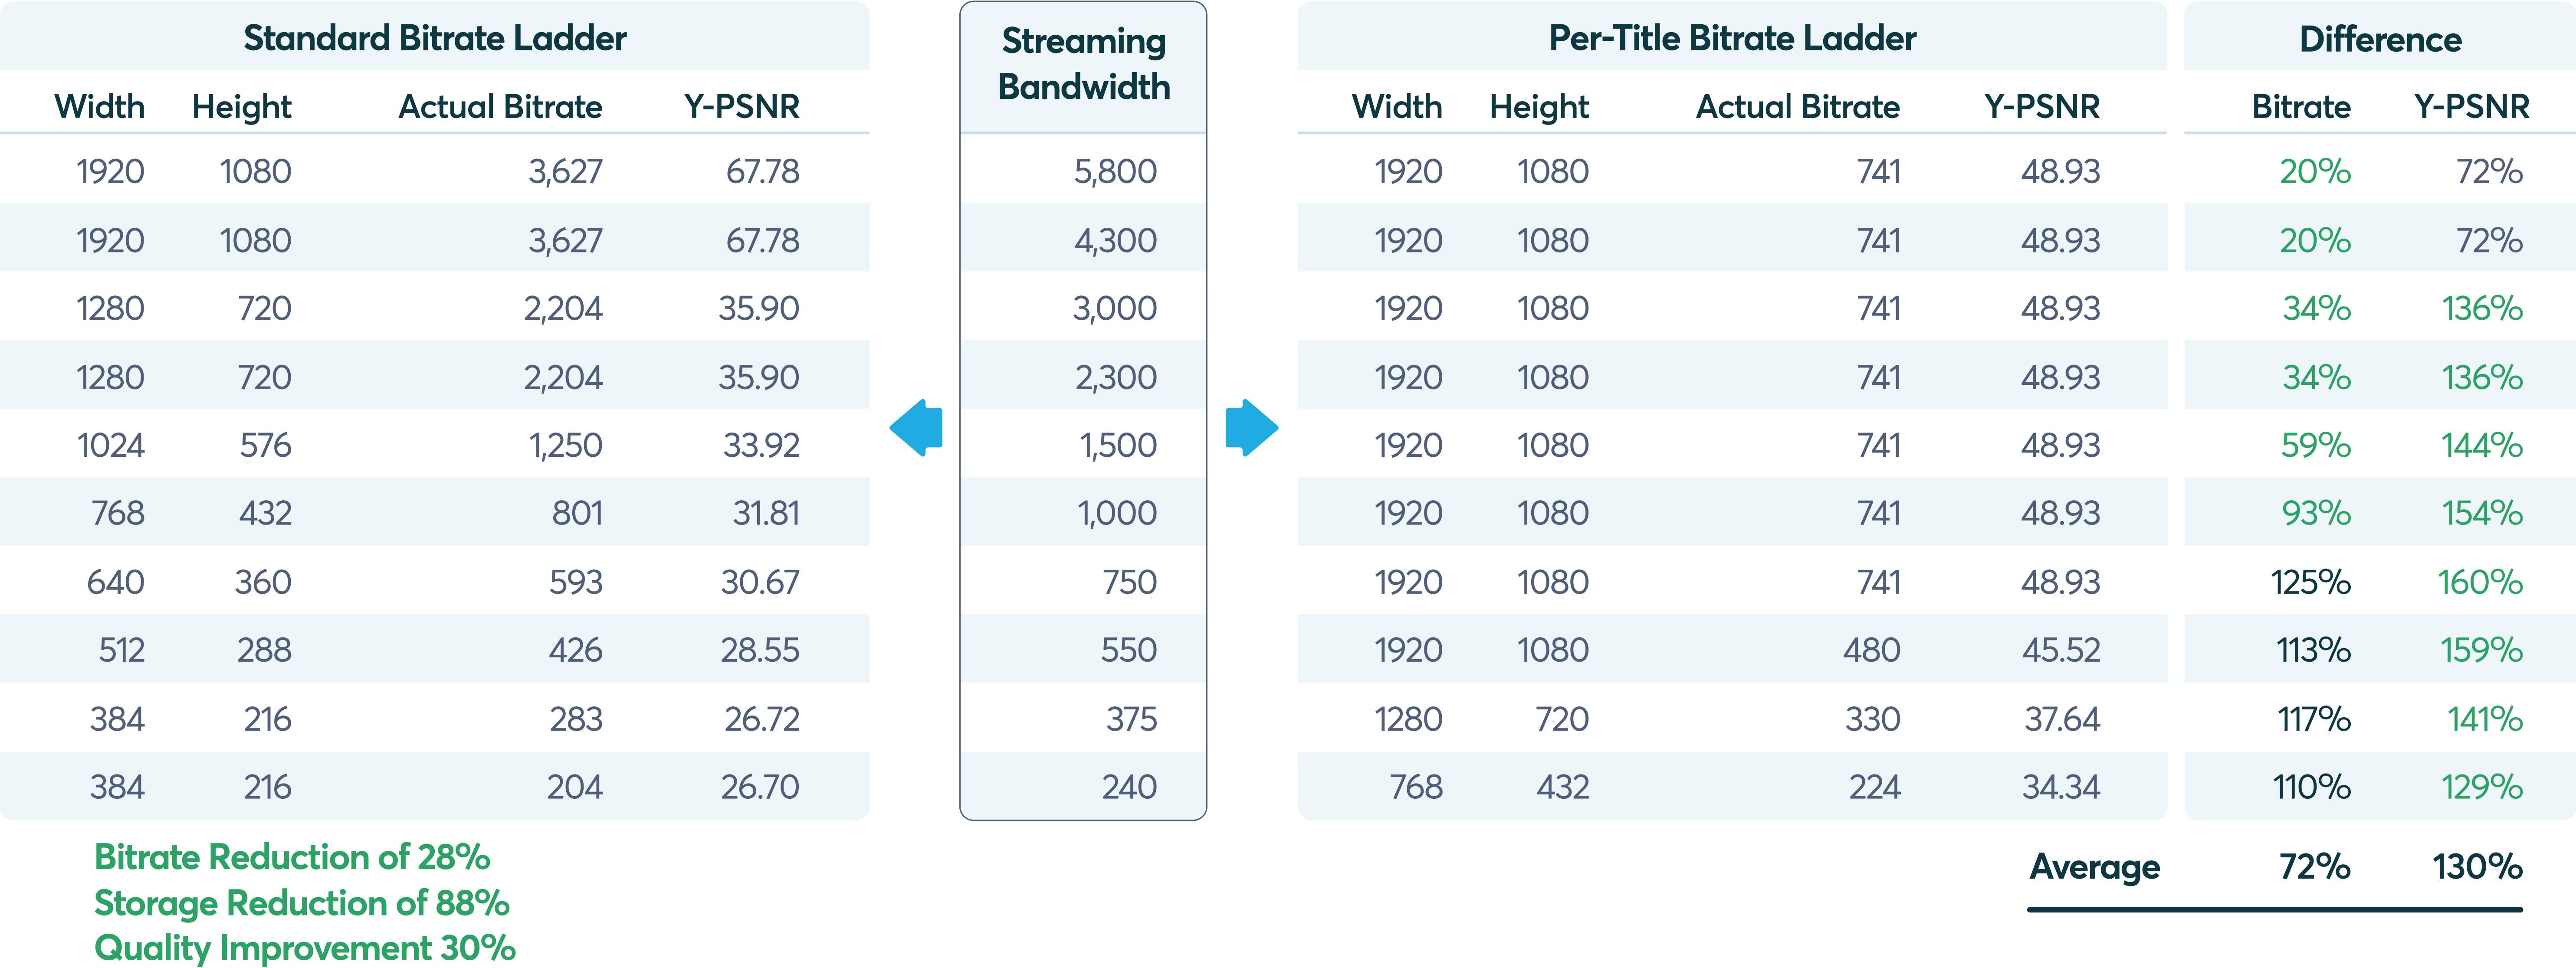 encoding definition: A bitrate ladder table